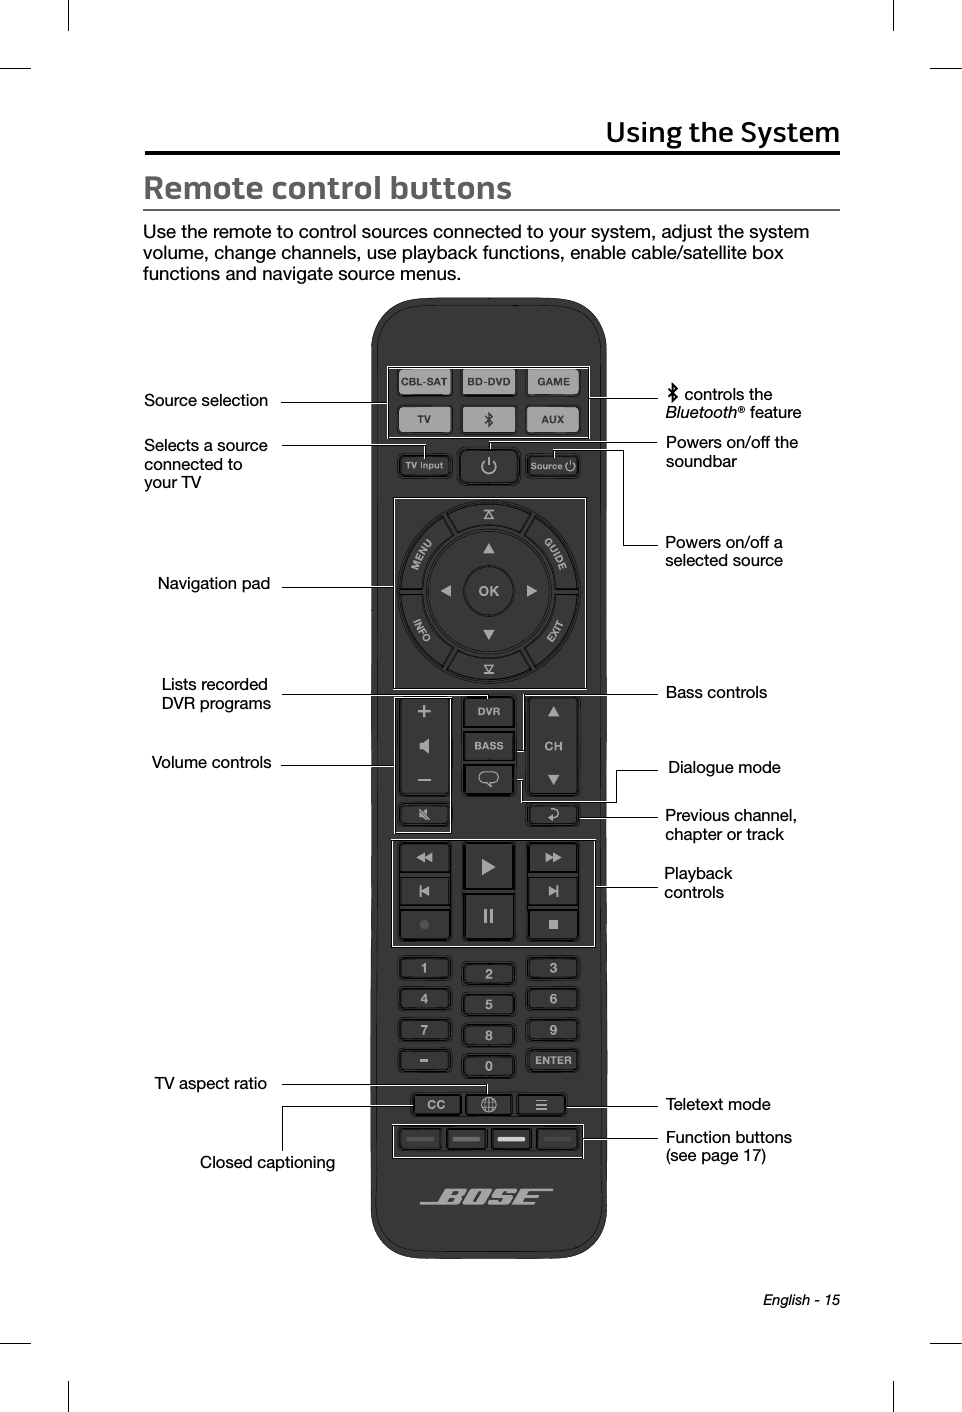  English - 15Remote control buttonsUse the remote to control sources connected to your system, adjust the system volume, change channels, use playback functions, enable cable/satellite box  functions and navigate source menus. Navigation padSource selectionLists recorded DVR programsTV aspect ratioClosed captioningSelects a source connected to your TVFunction buttons (see page 17)Bass controlsPlayback controlsPowers on/off the soundbarPowers on/off a selected sourcePrevious channel, chapter or trackTeletext modeVolume controls Dialogue mode controls the  Bluetooth® featureUsing the System